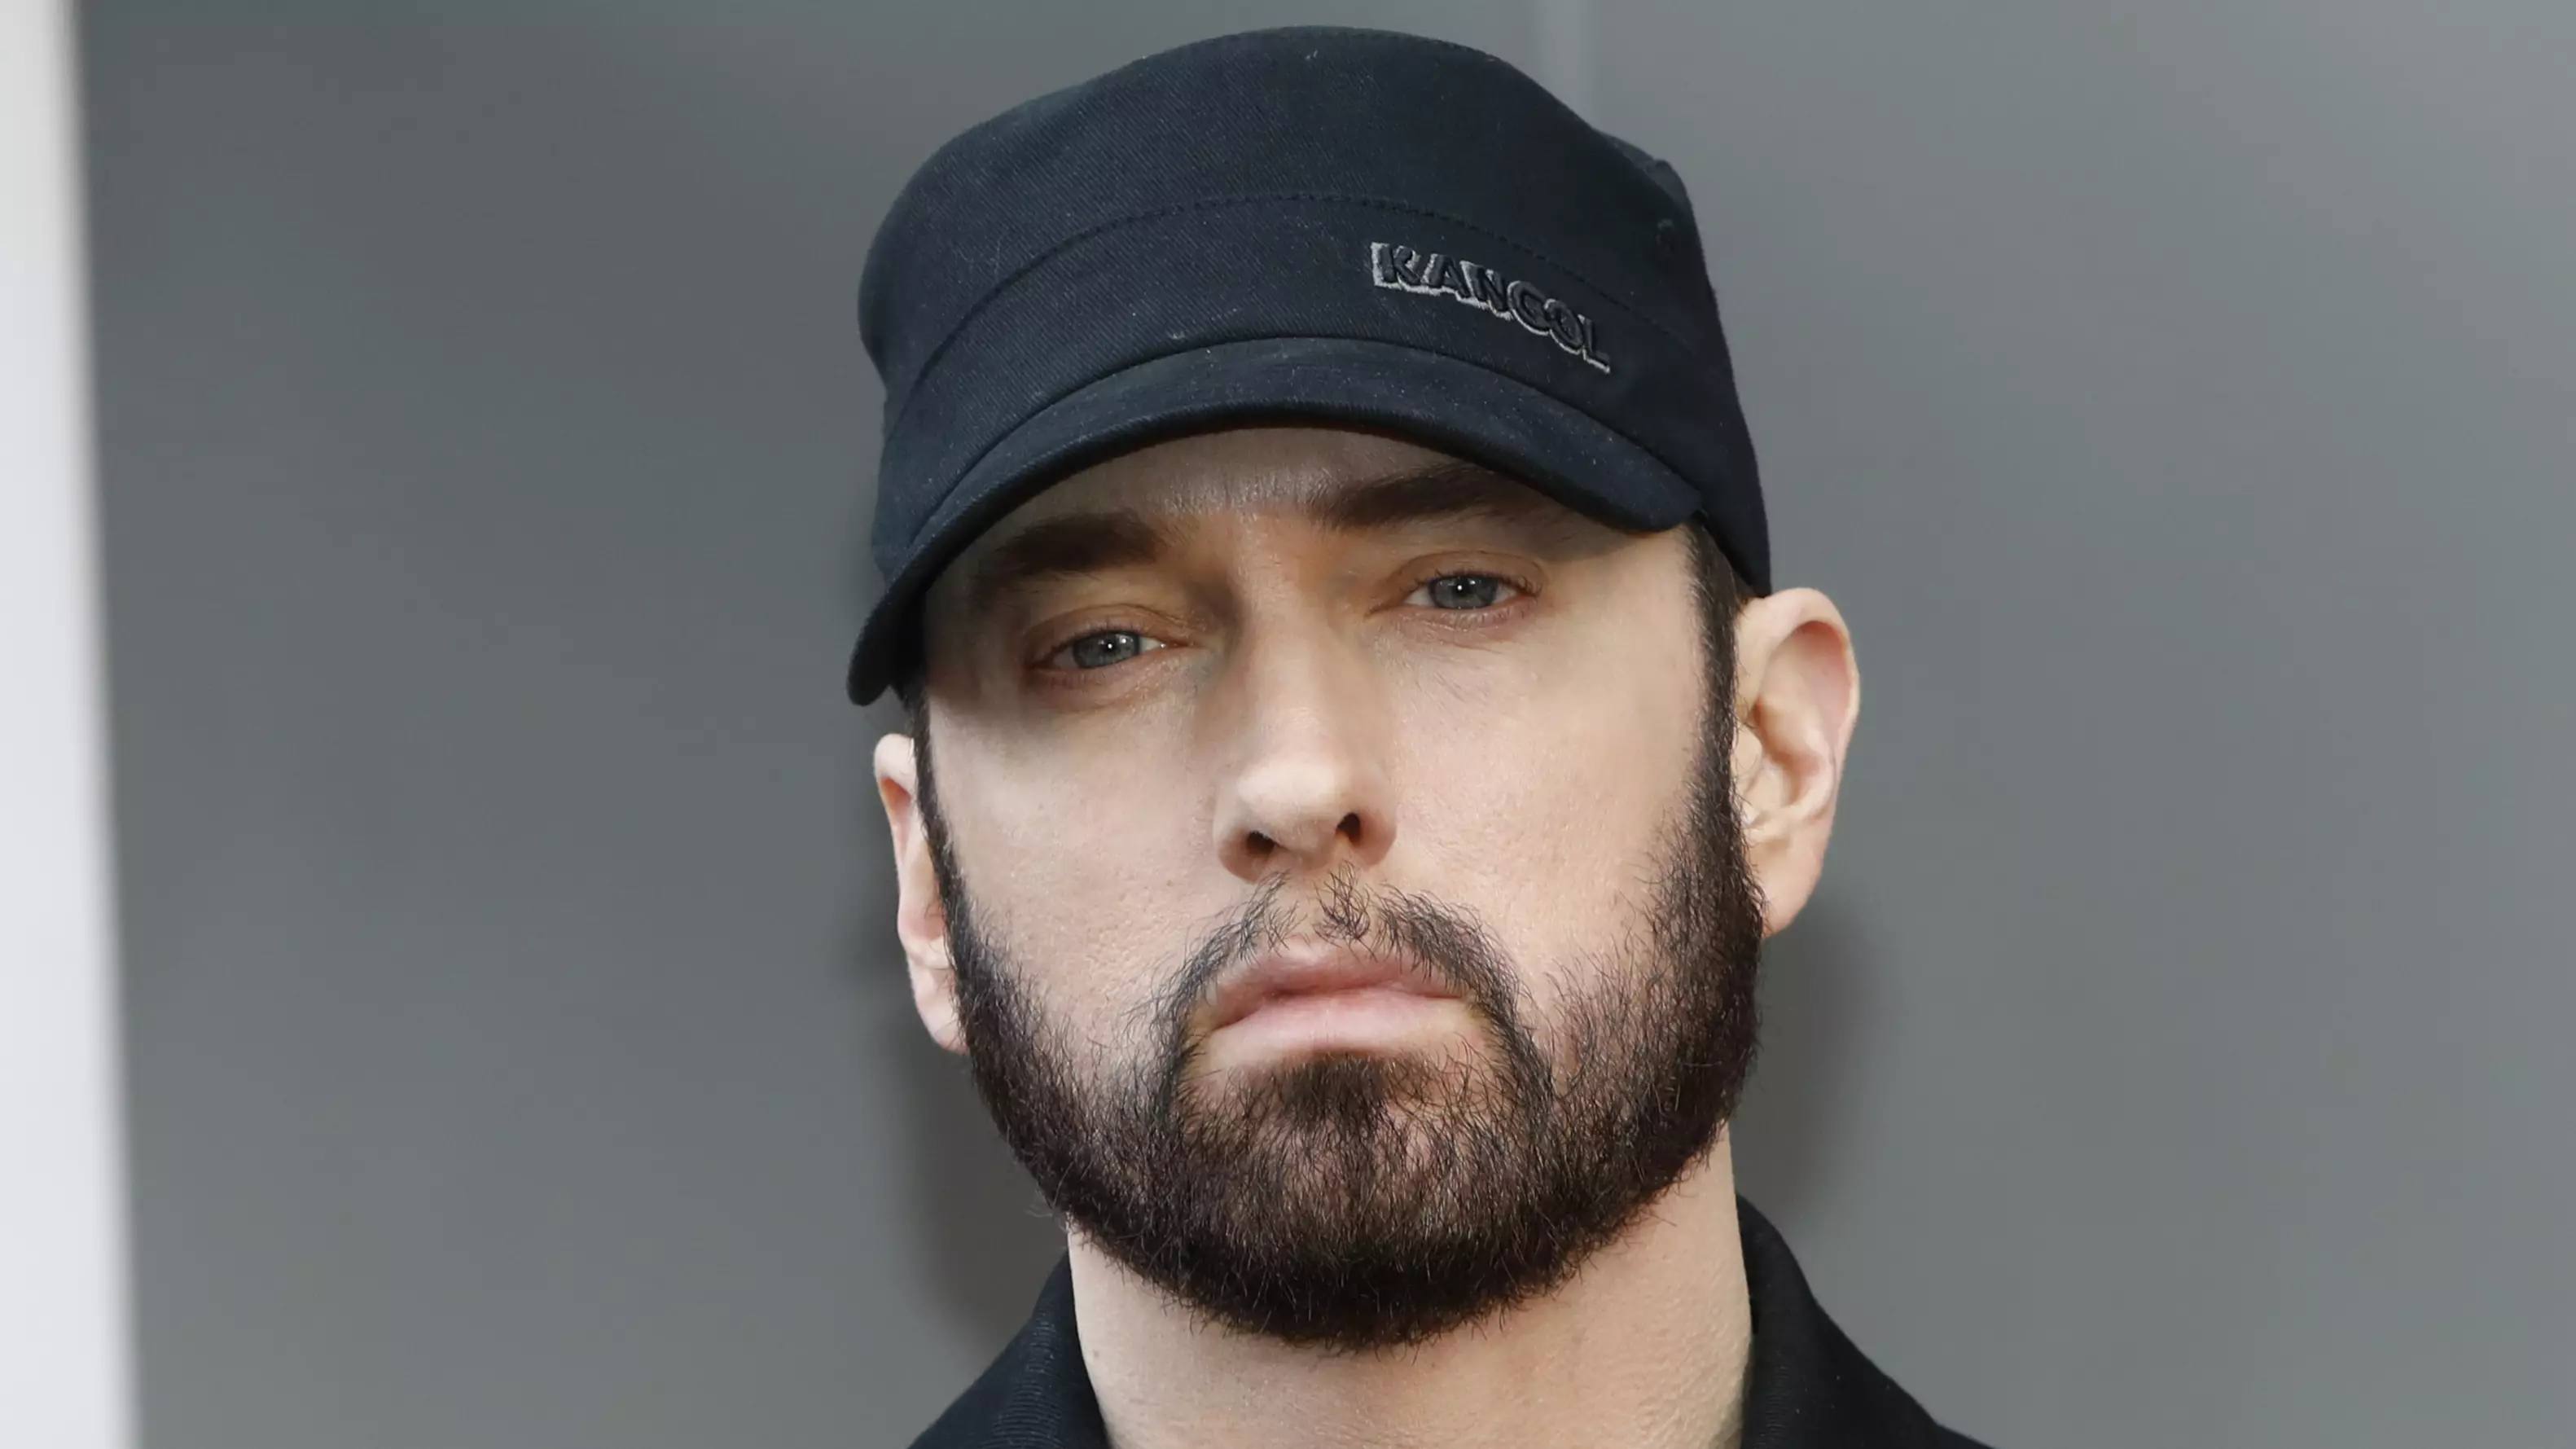 Eminem Allows Joe Biden To Use 'Lose Yourself' For Campaign Ad